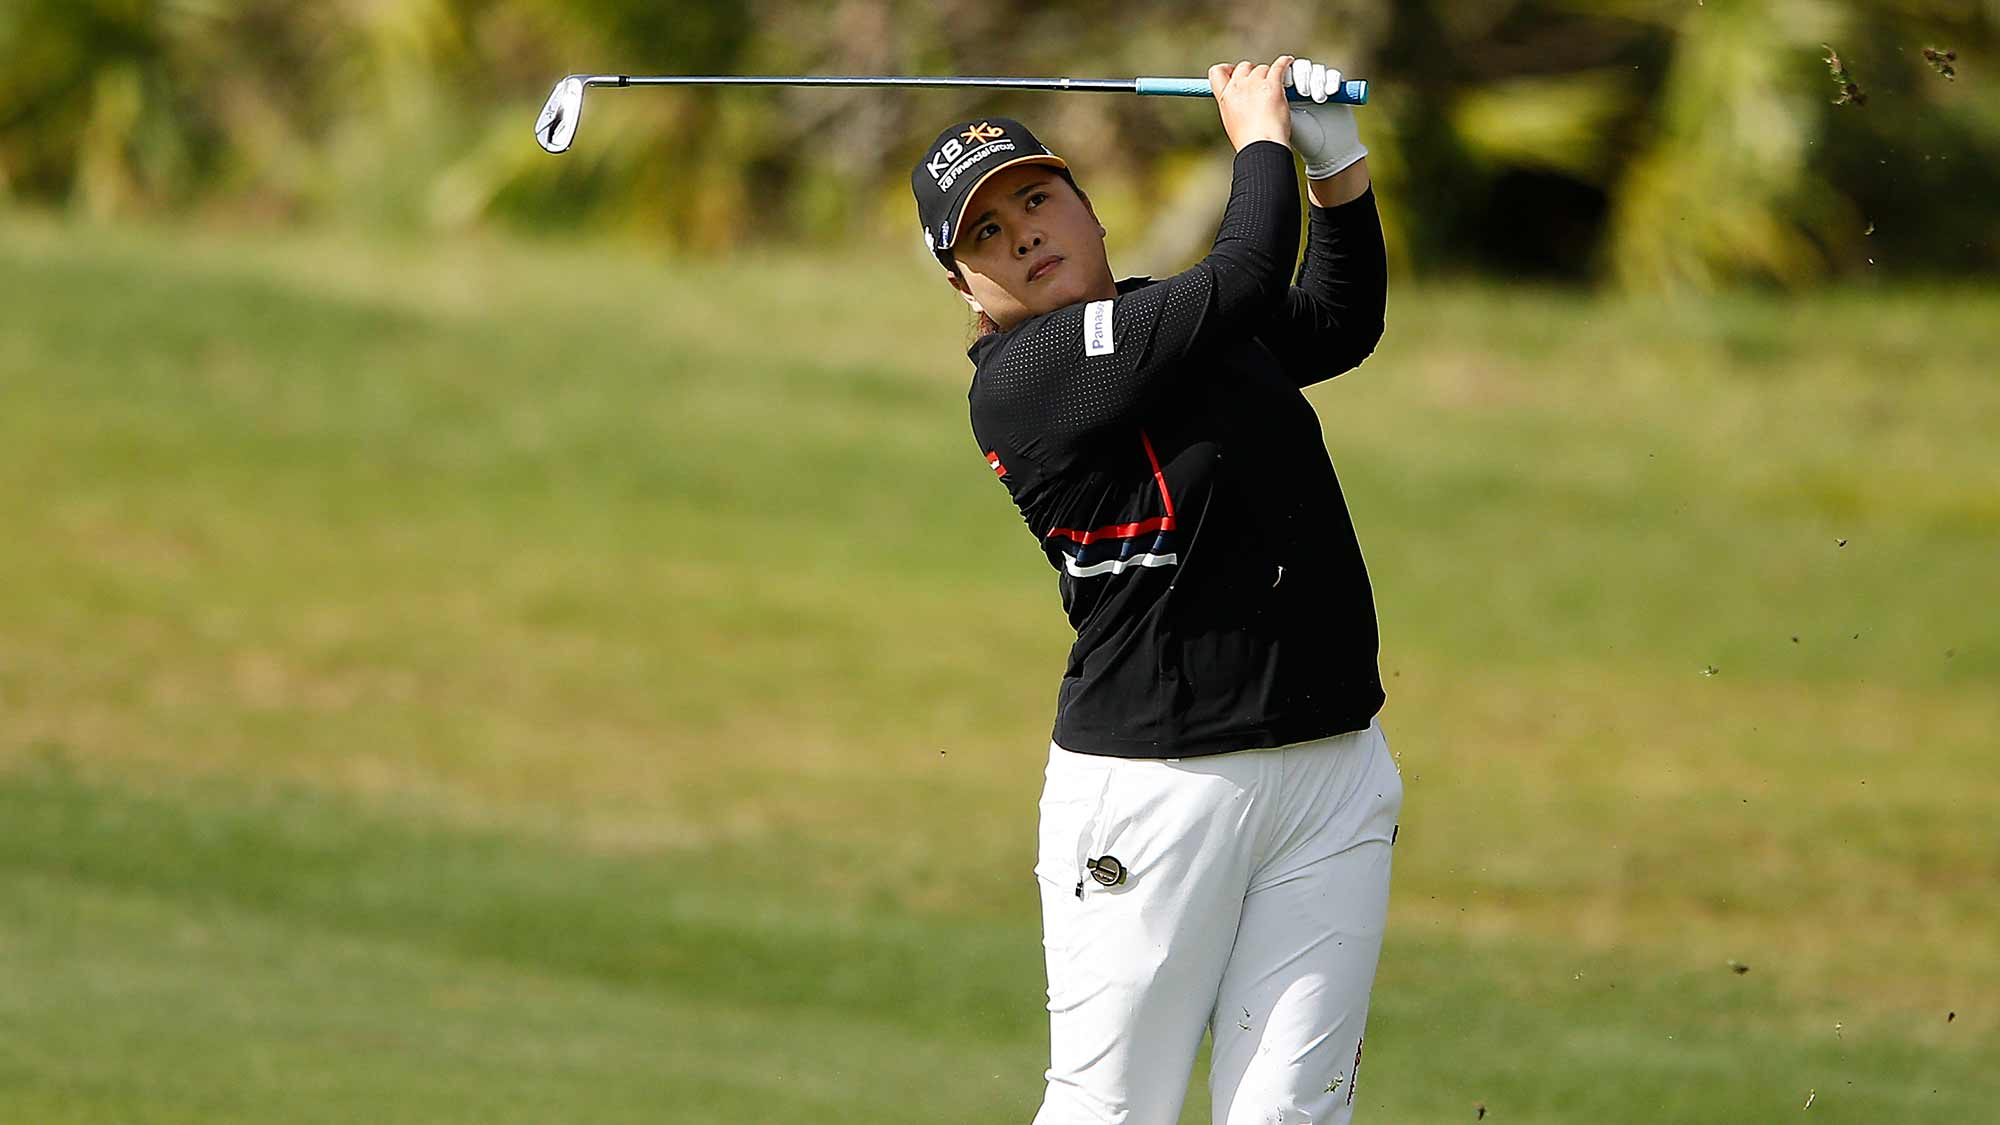  Inbee Park of South Korea plays a shot on the fourth hole during the third round of the Diamond Resorts Tournament of Champions at Tranquilo Golf Course at Four Seasons Golf and Sports Club Orlando on January 18, 2020 in Lake Buena Vista, Florida